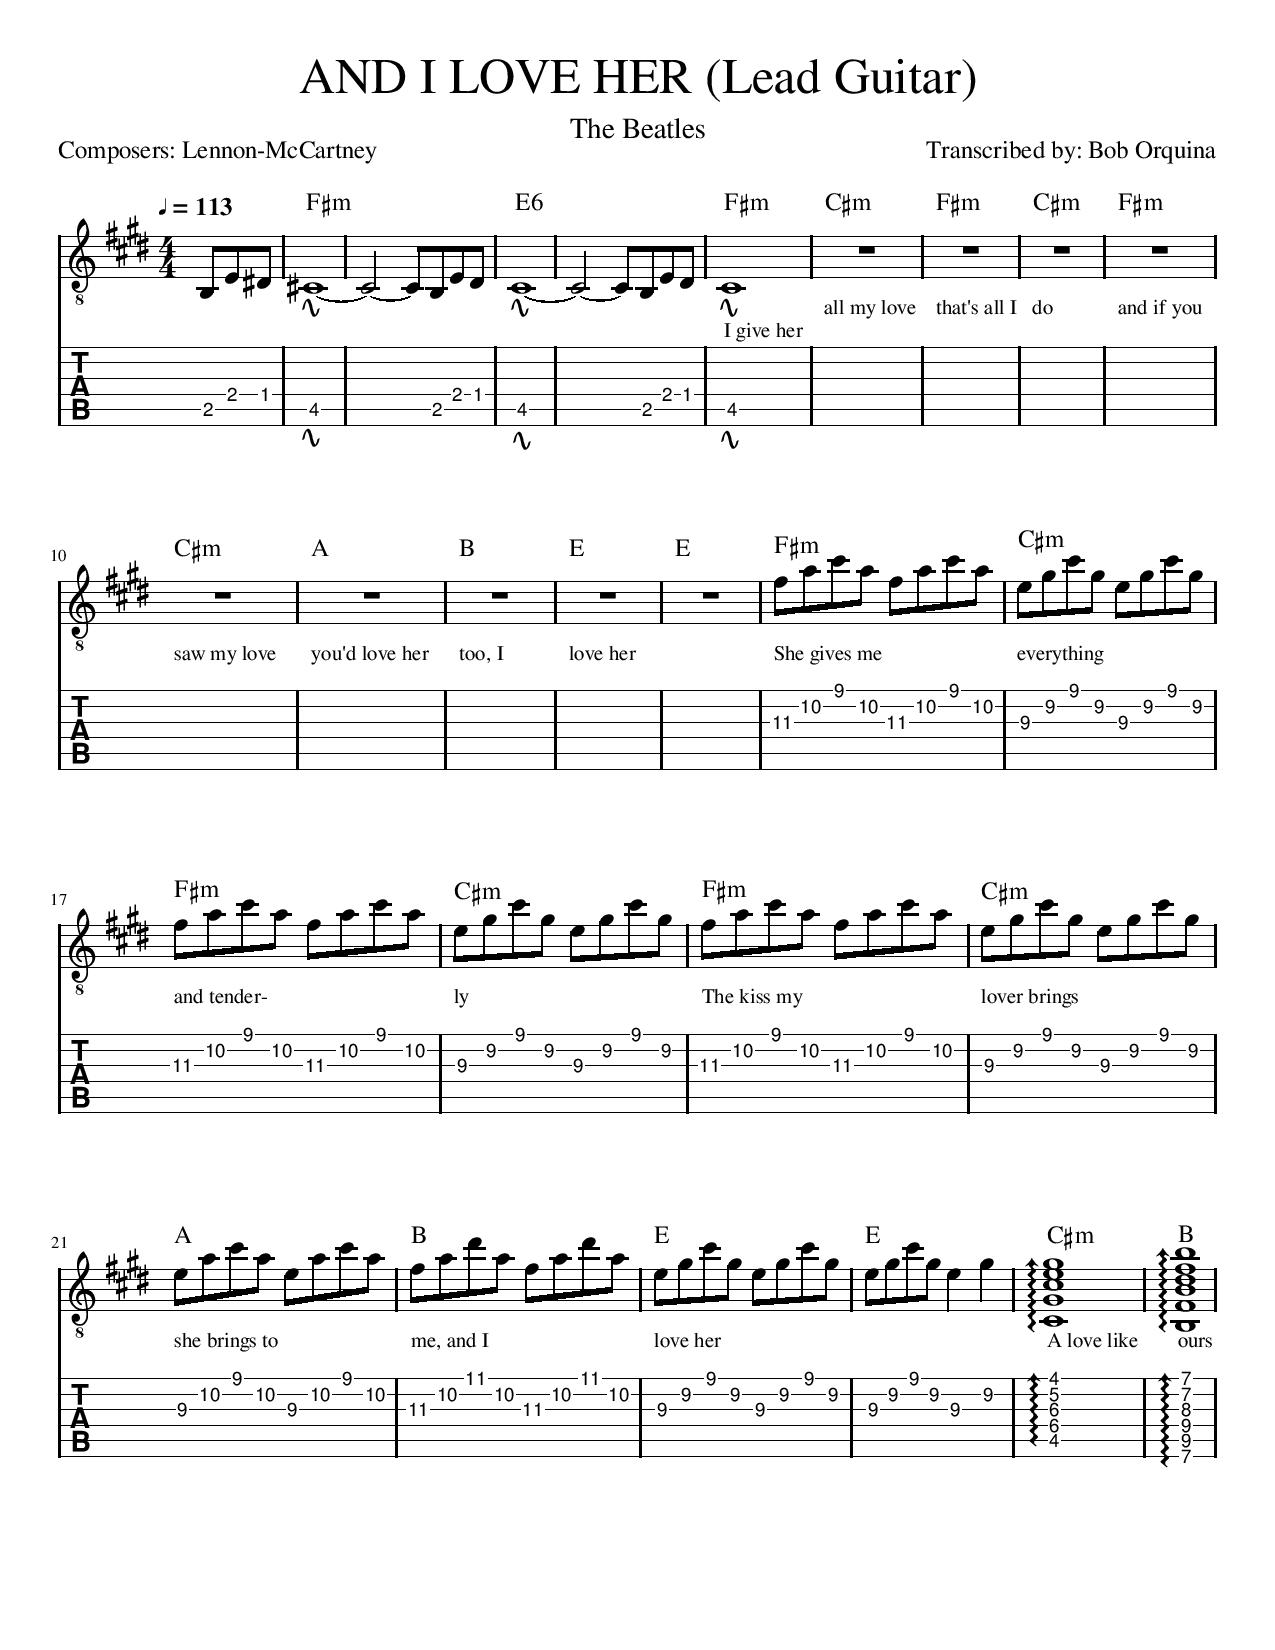 And I Love Her [Jazz version] Sheet Music | The Beatles | Real Book ...